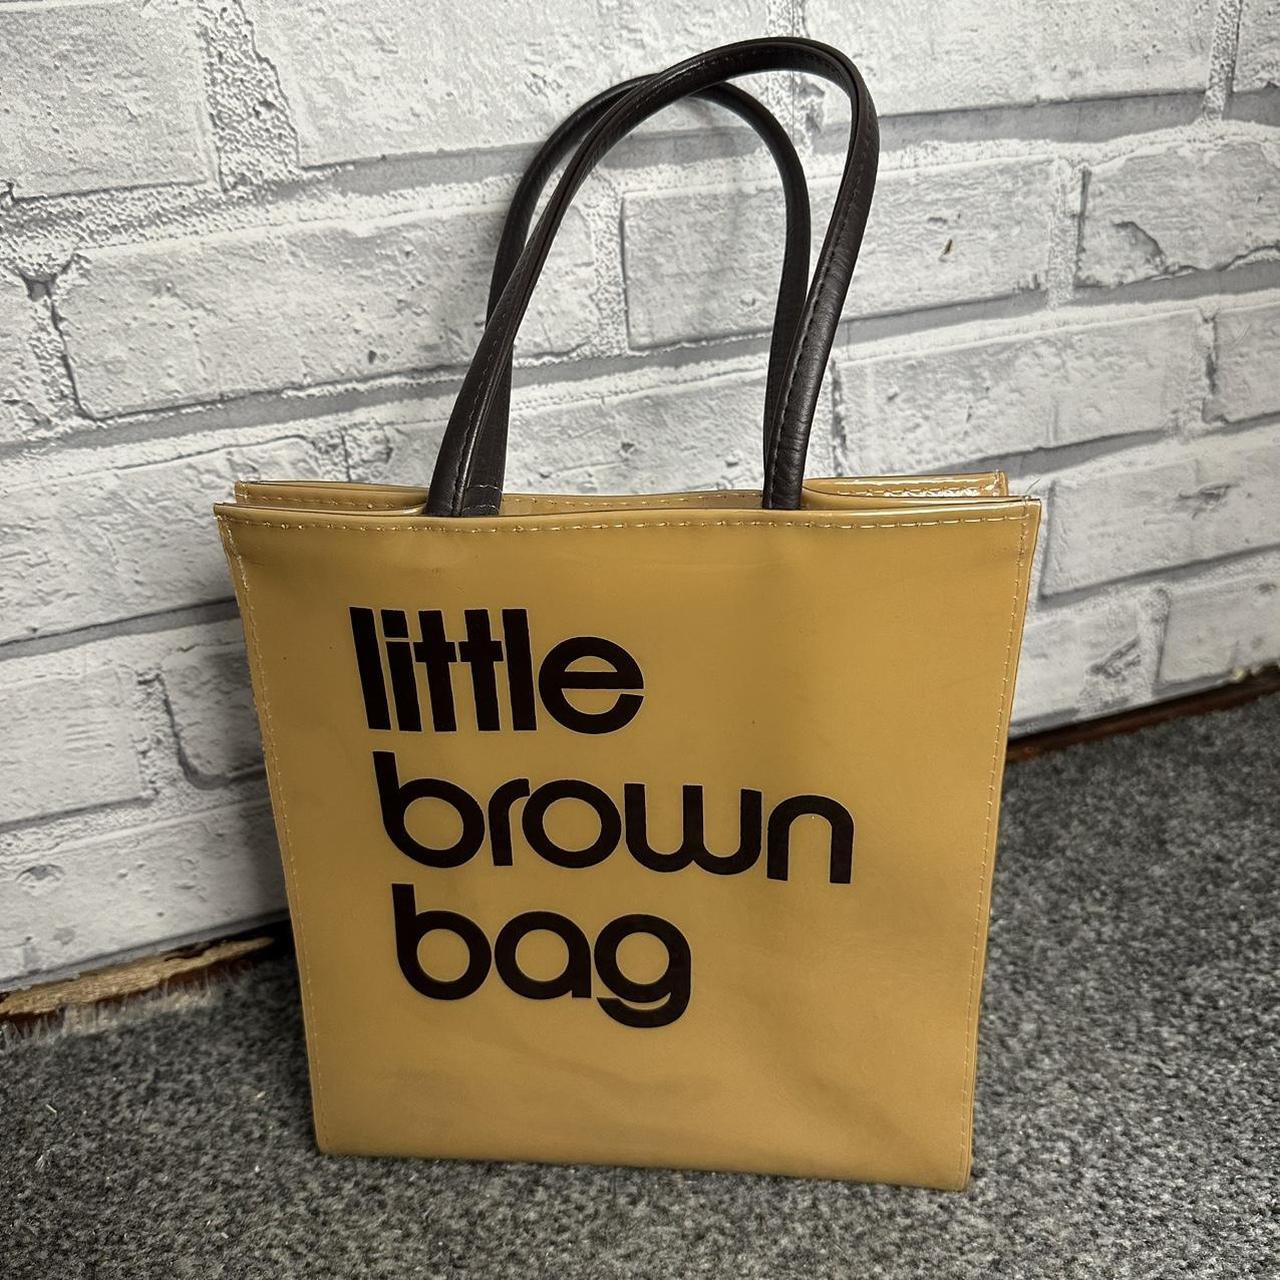 The Little Brown Bag & coin bag - Charitable Marketplace - Pike